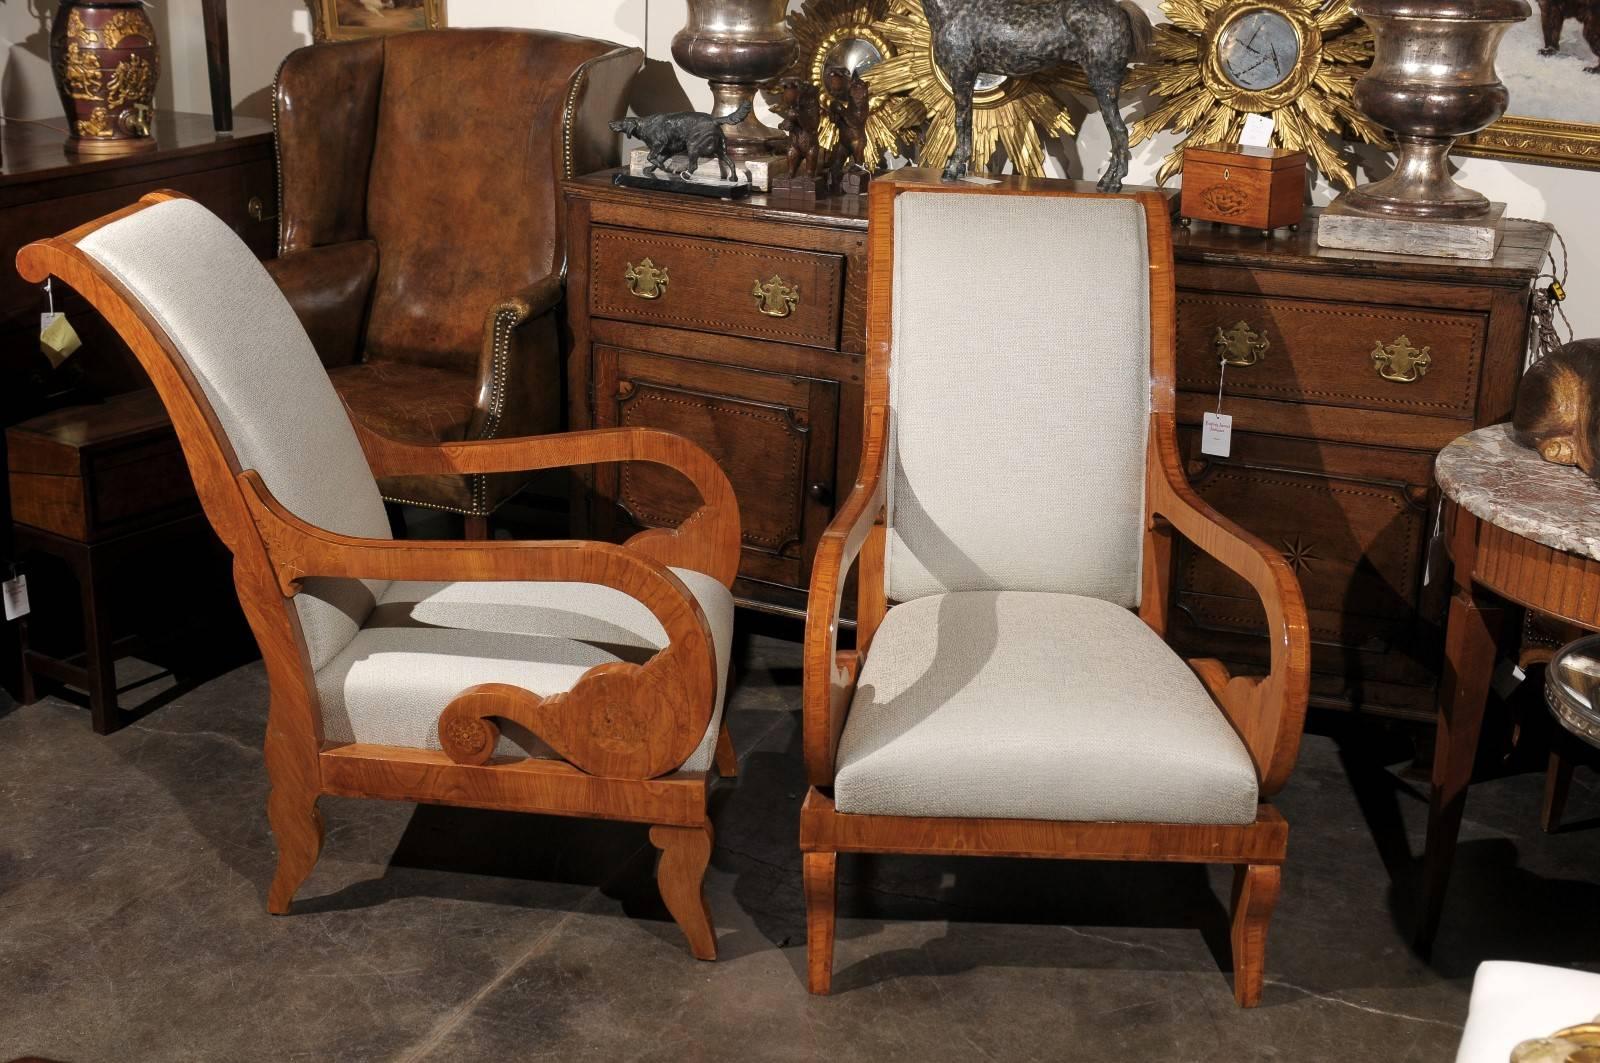 This pair of Austrian upholstered Biedermeier armchairs from the mid 19th century features slanted backs with discreet scrolls in the top rail. The lovely arms are the definite focal point of the ensemble, with their exquisite s-scroll supports and